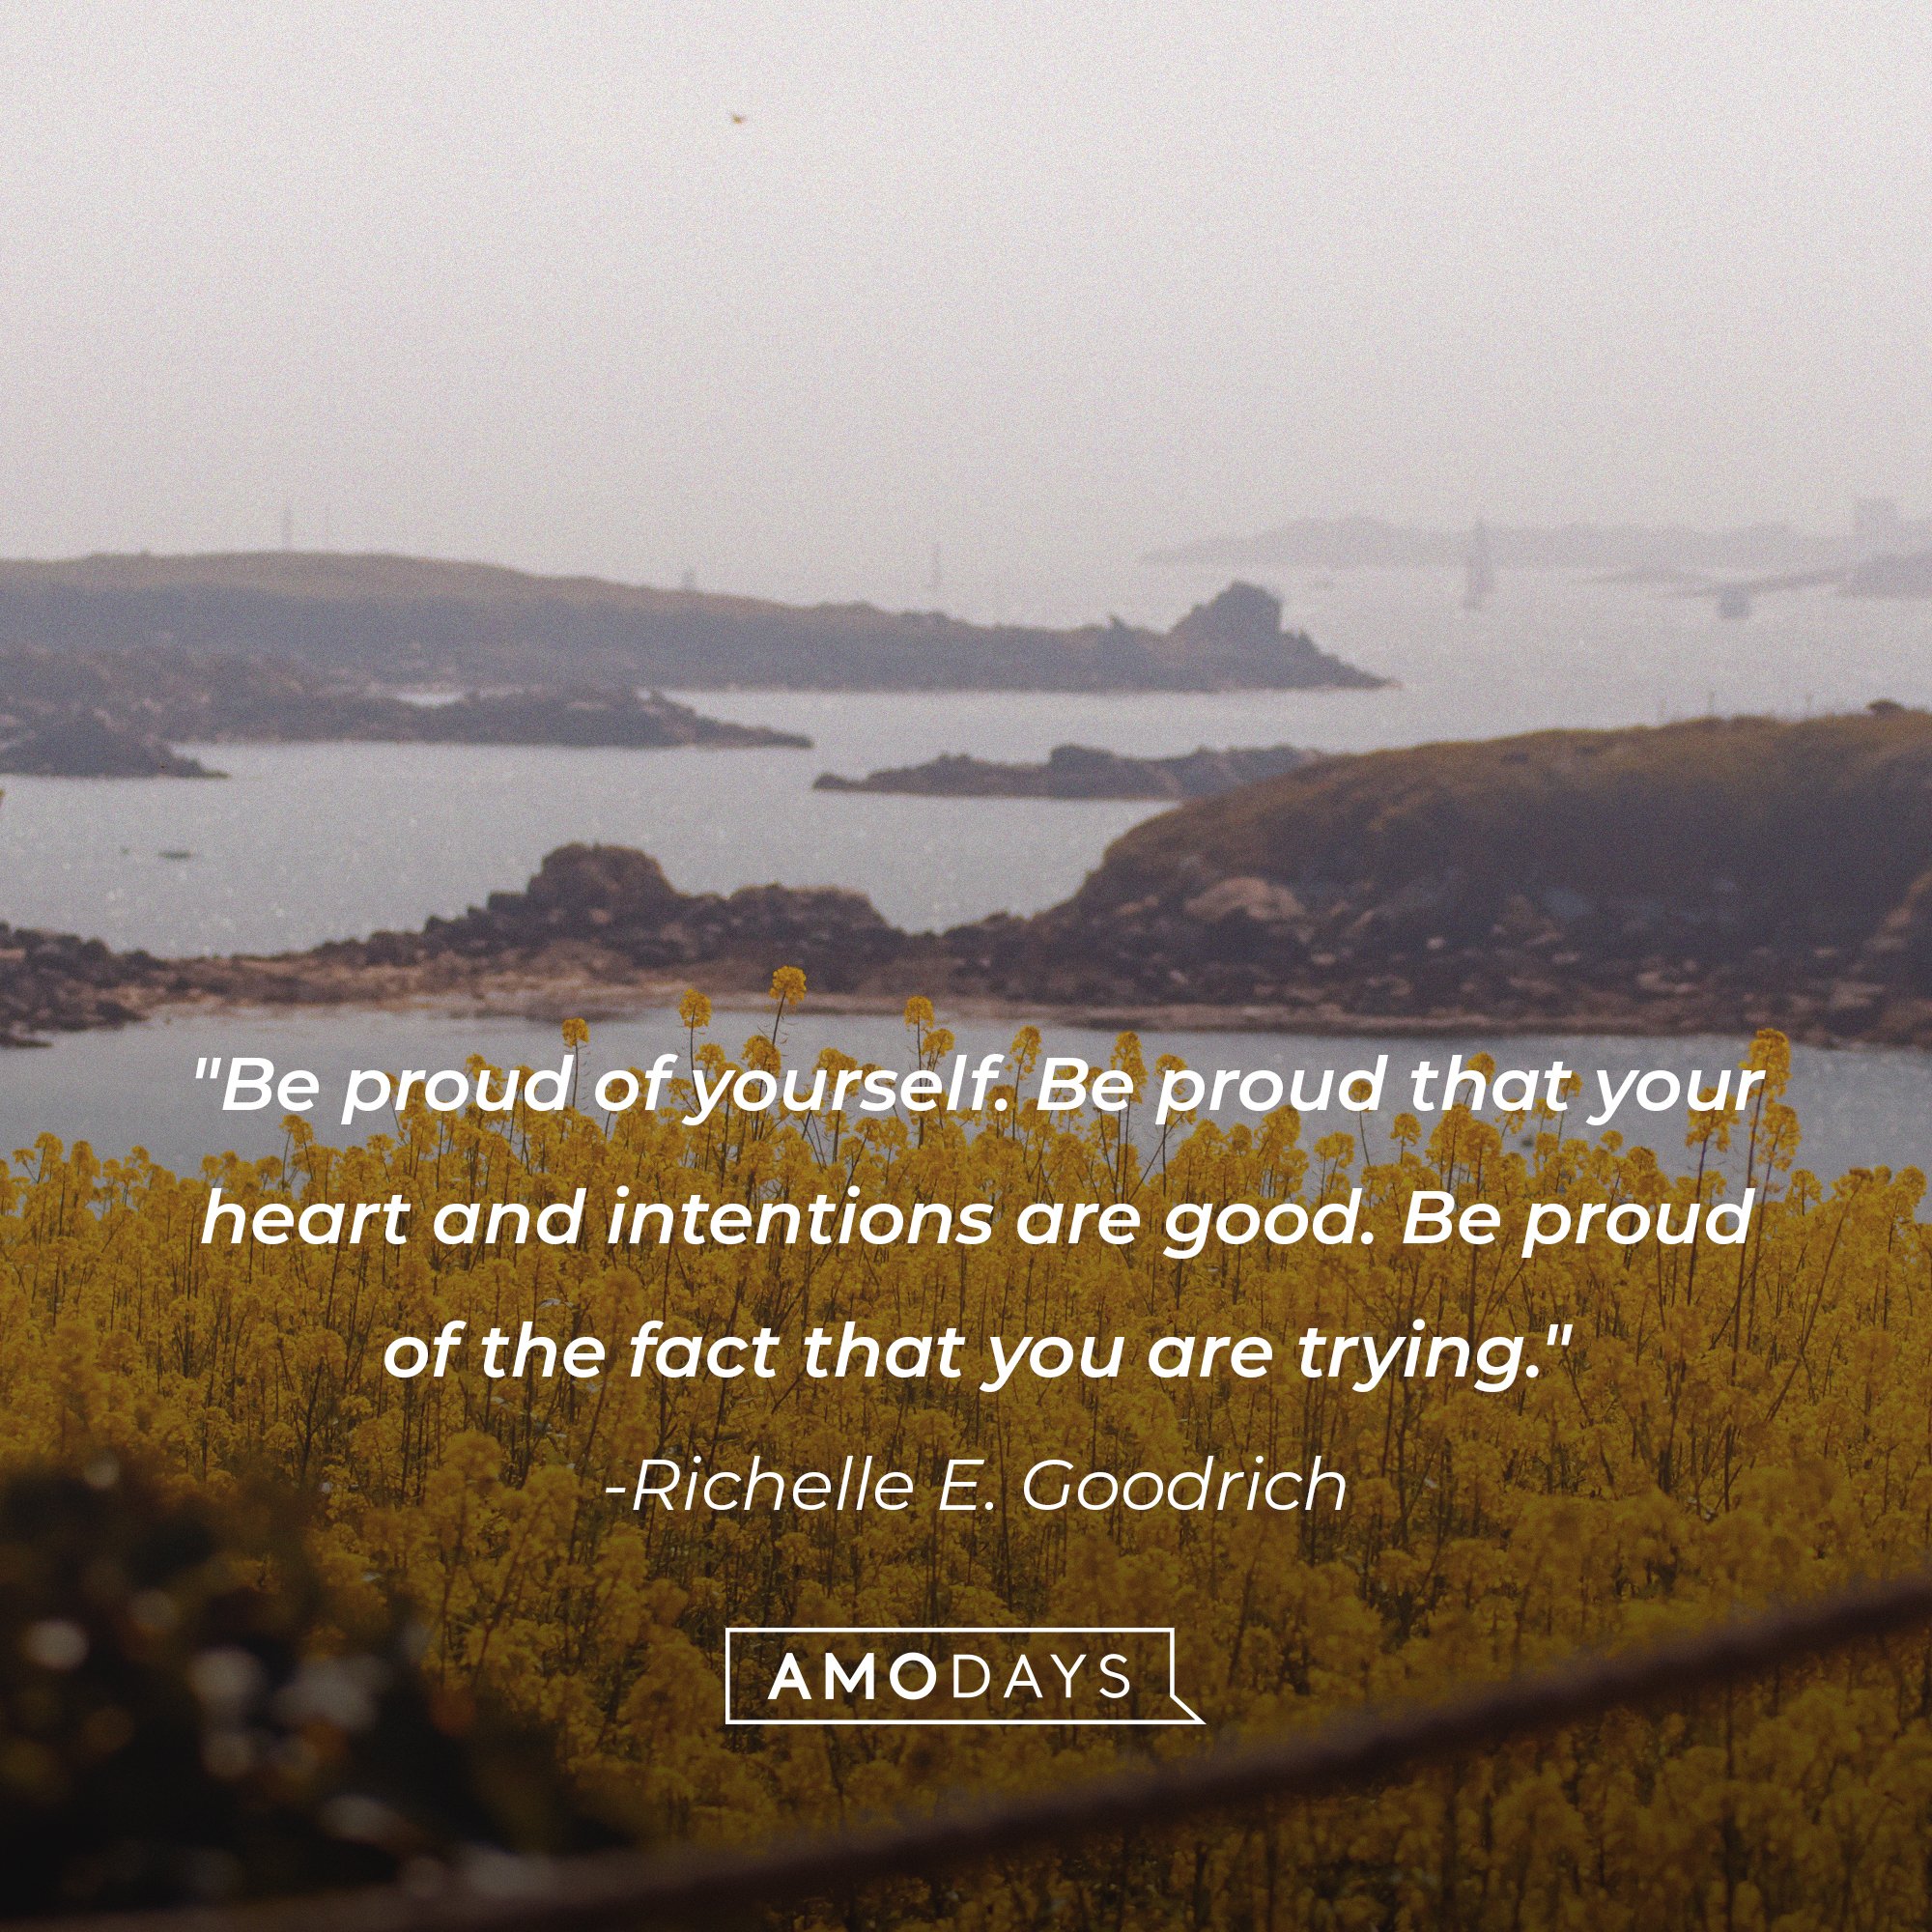 Richelle E. Goodrich’s quote: "Be proud of yourself. Be proud that your heart and intentions are good. Be proud of the fact that you are trying." | Image: AmoDays 